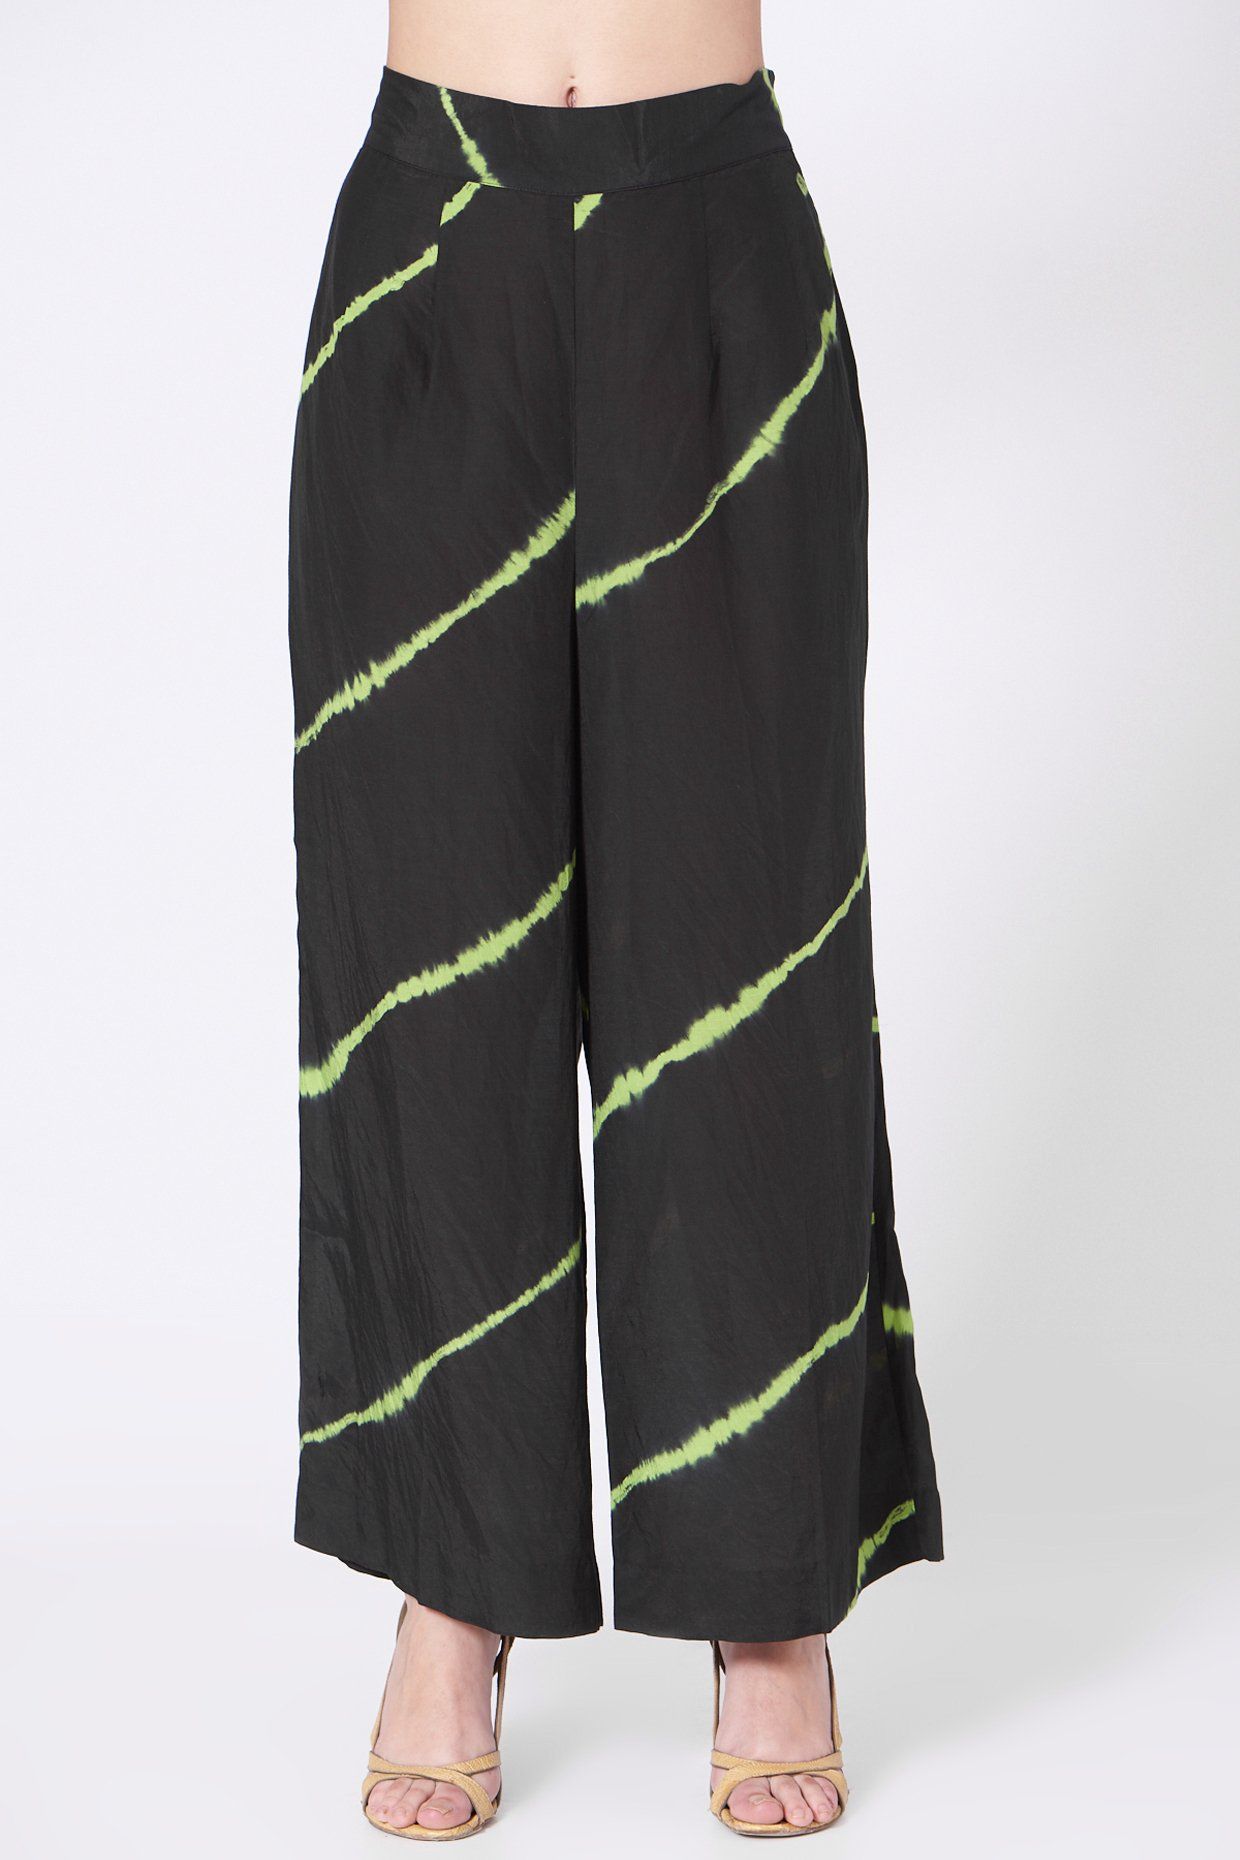 BLACK AND NEON GREEN CO-ORD Fashion The Pot Plant